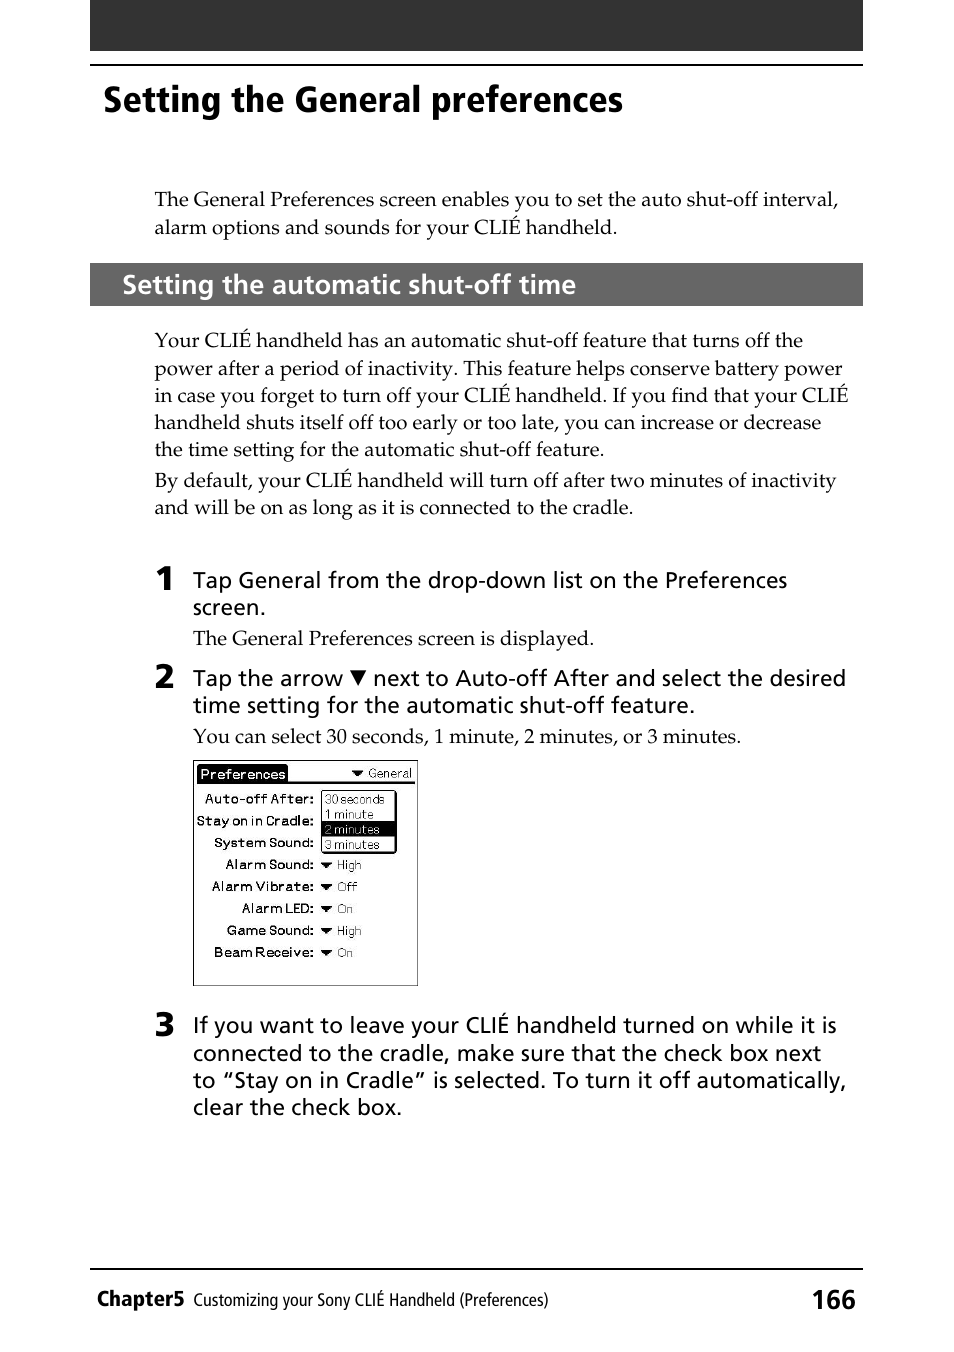 Setting the general preferences, Setting the automatic shut-off time | Sony PEG-T415G User Manual | Page 166 / 220